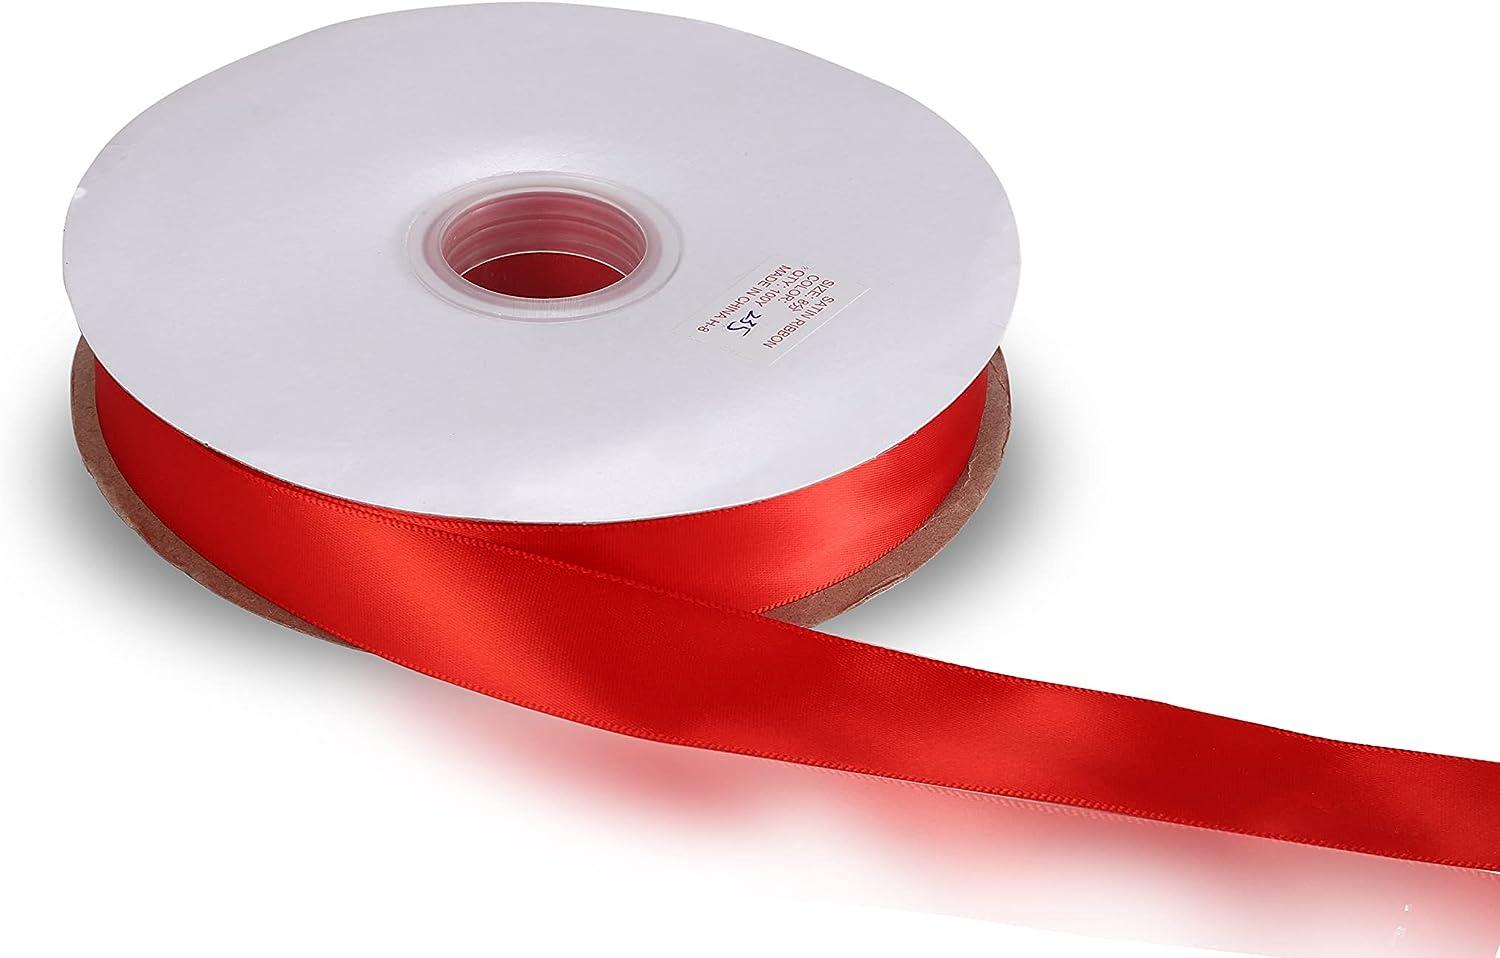 KSRIGHT 1 inch ( 2.54cm Wide)Double Face Red Ribbon 25 Yards for Gift  Wrapping Wedding Decoration Bows Making Sewing DIY Crafts Red 1 inch x 25  Yards